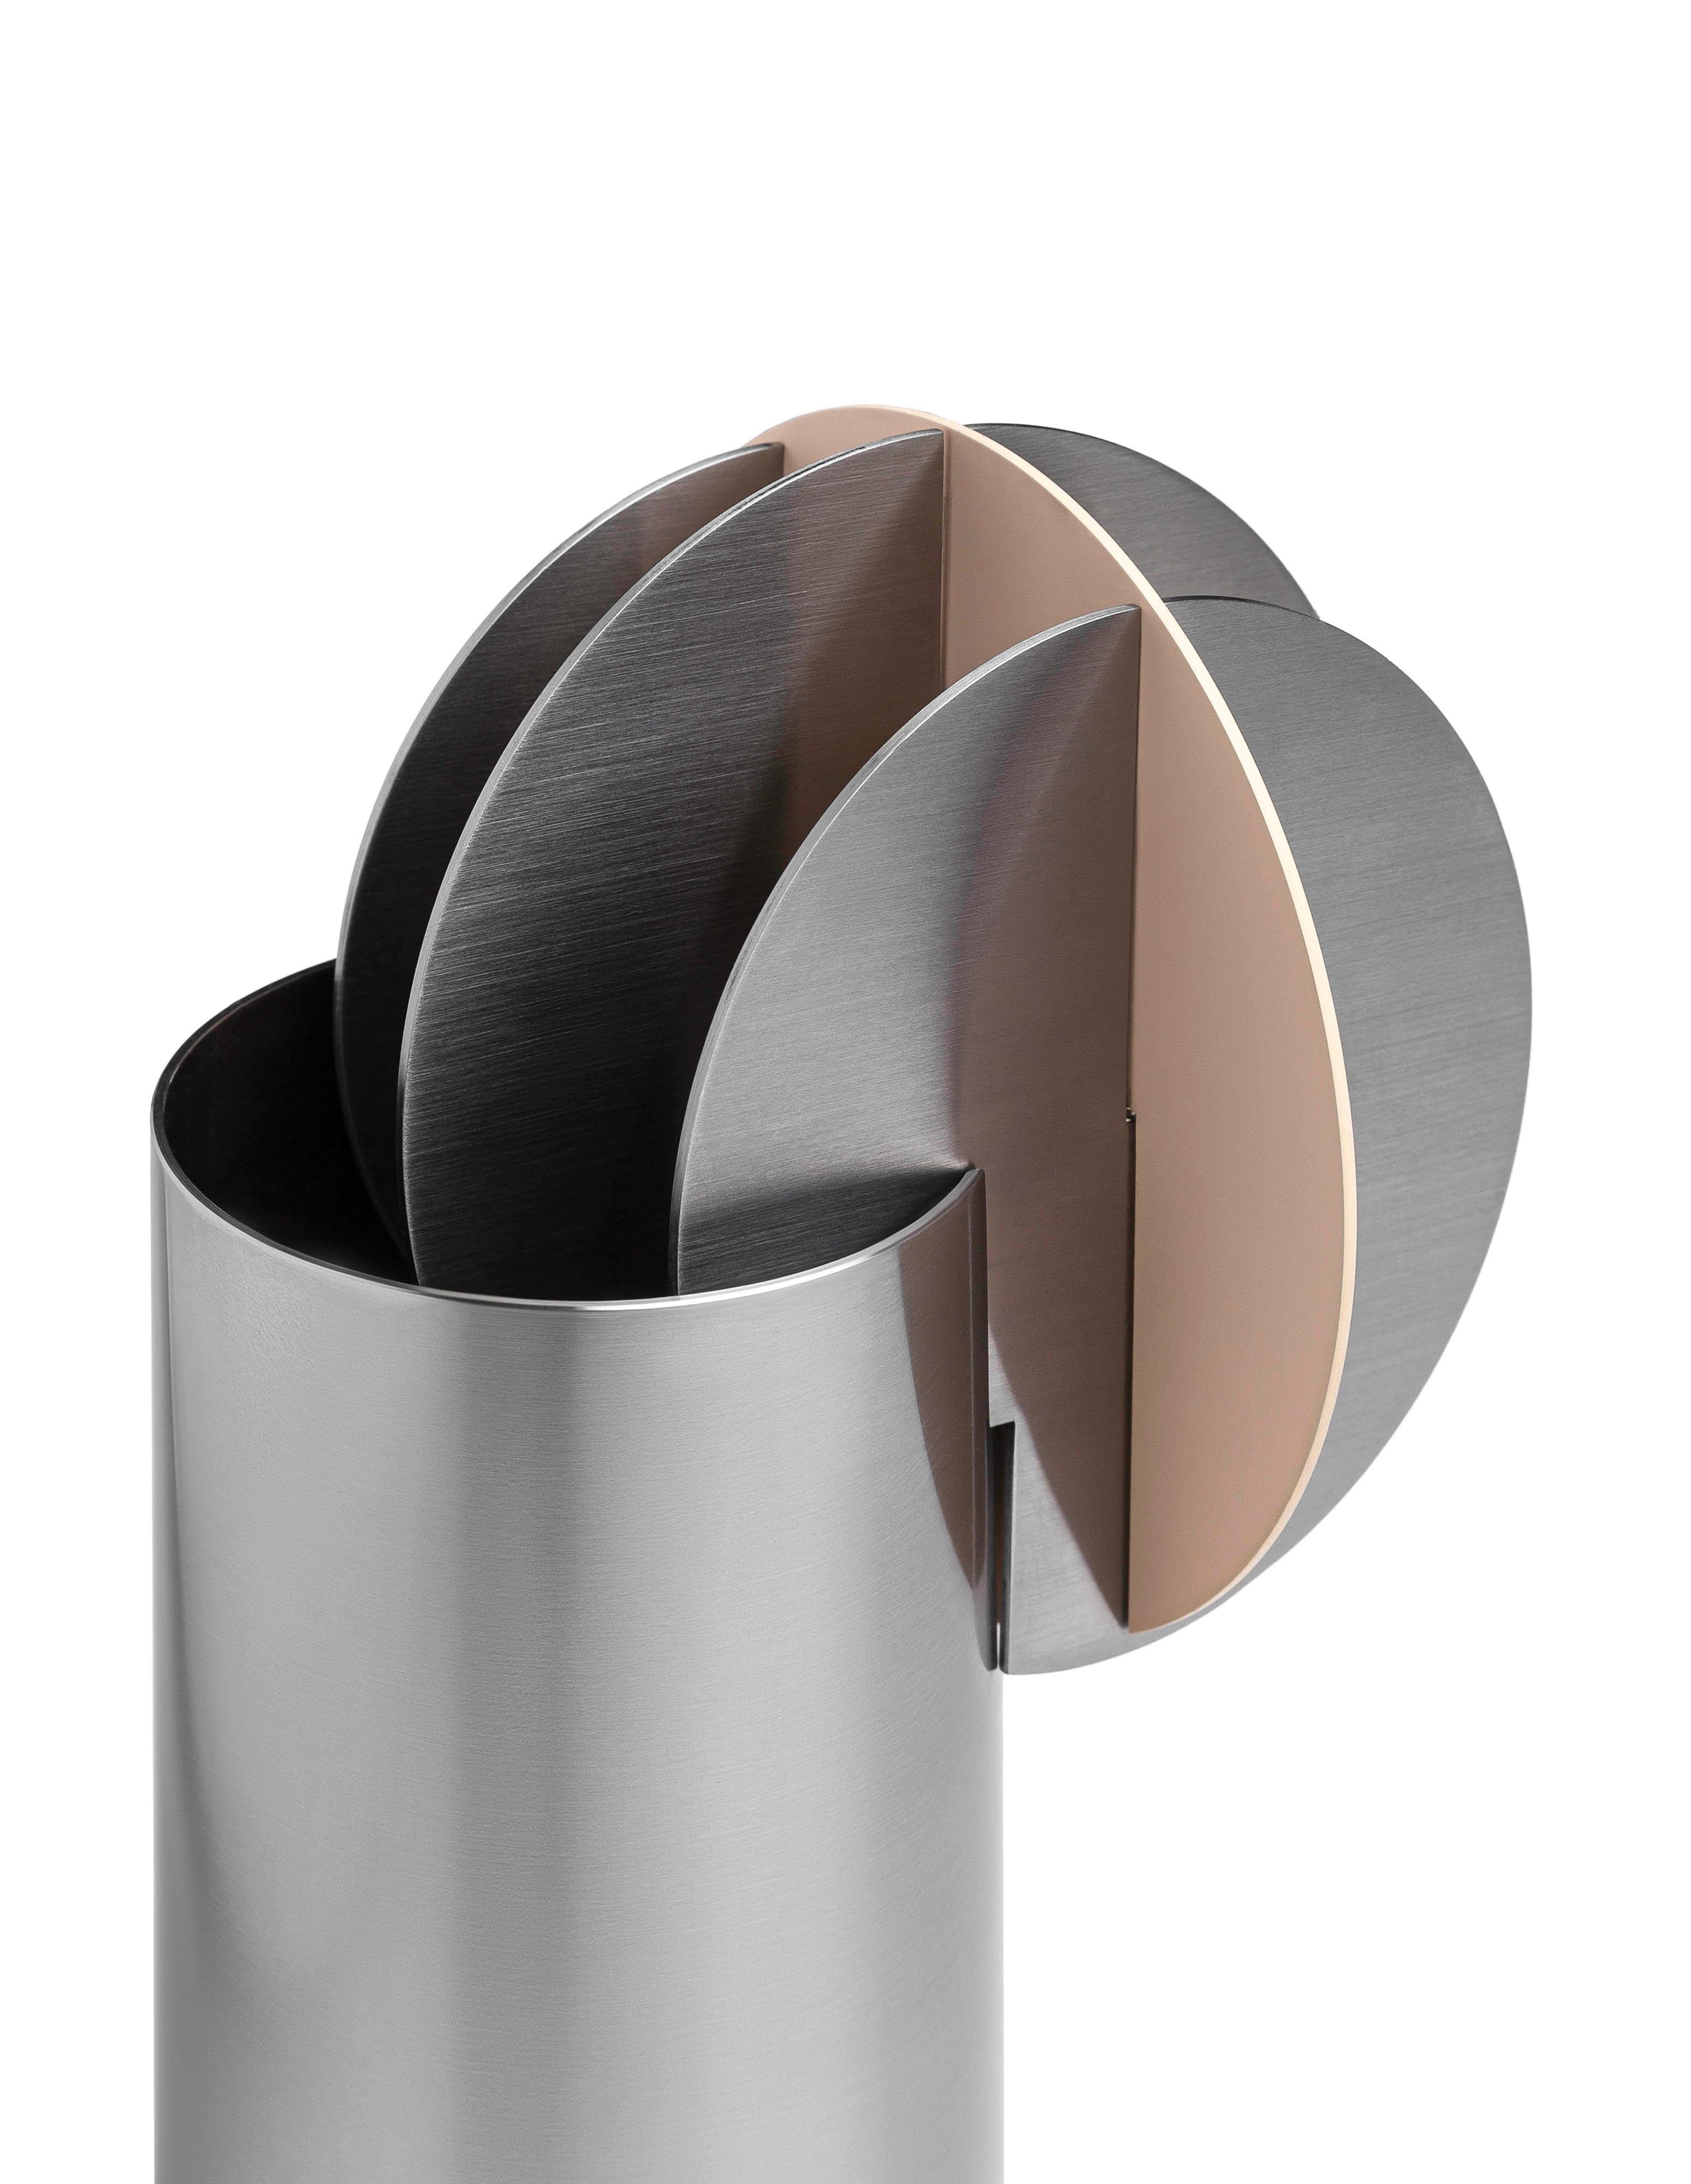 Organic Modern Contemporary Vase 'Delaunay CS11' by Noom, Brushed Stainless Steel For Sale